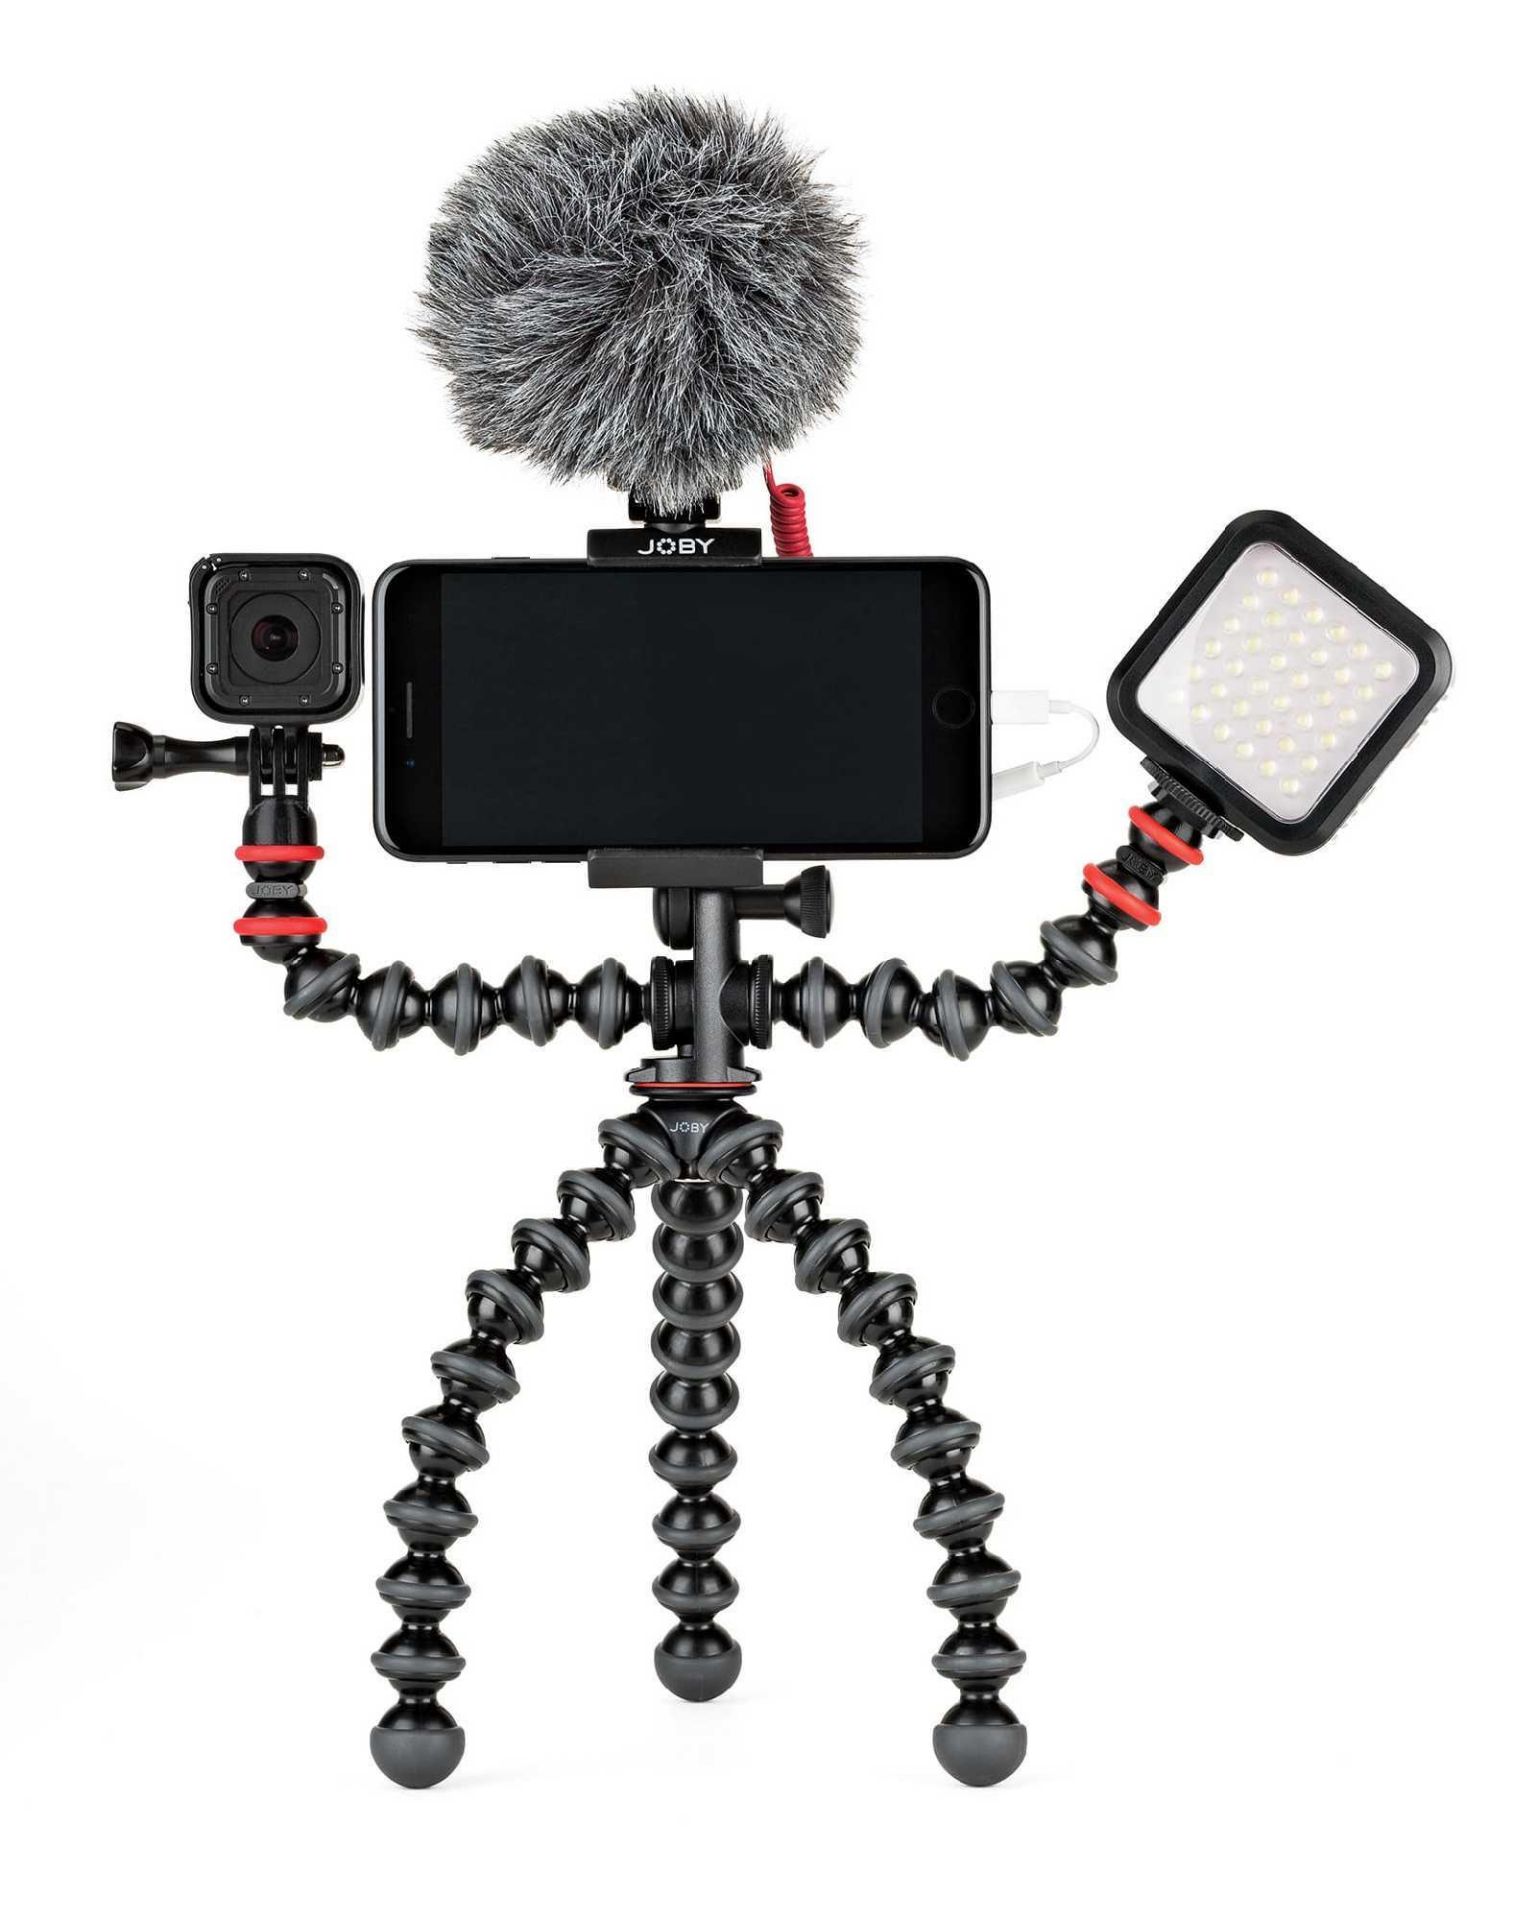 Combined Rrp £200 Lot To Contain 2 Boxed Joby Gorillapod Mobile Rig